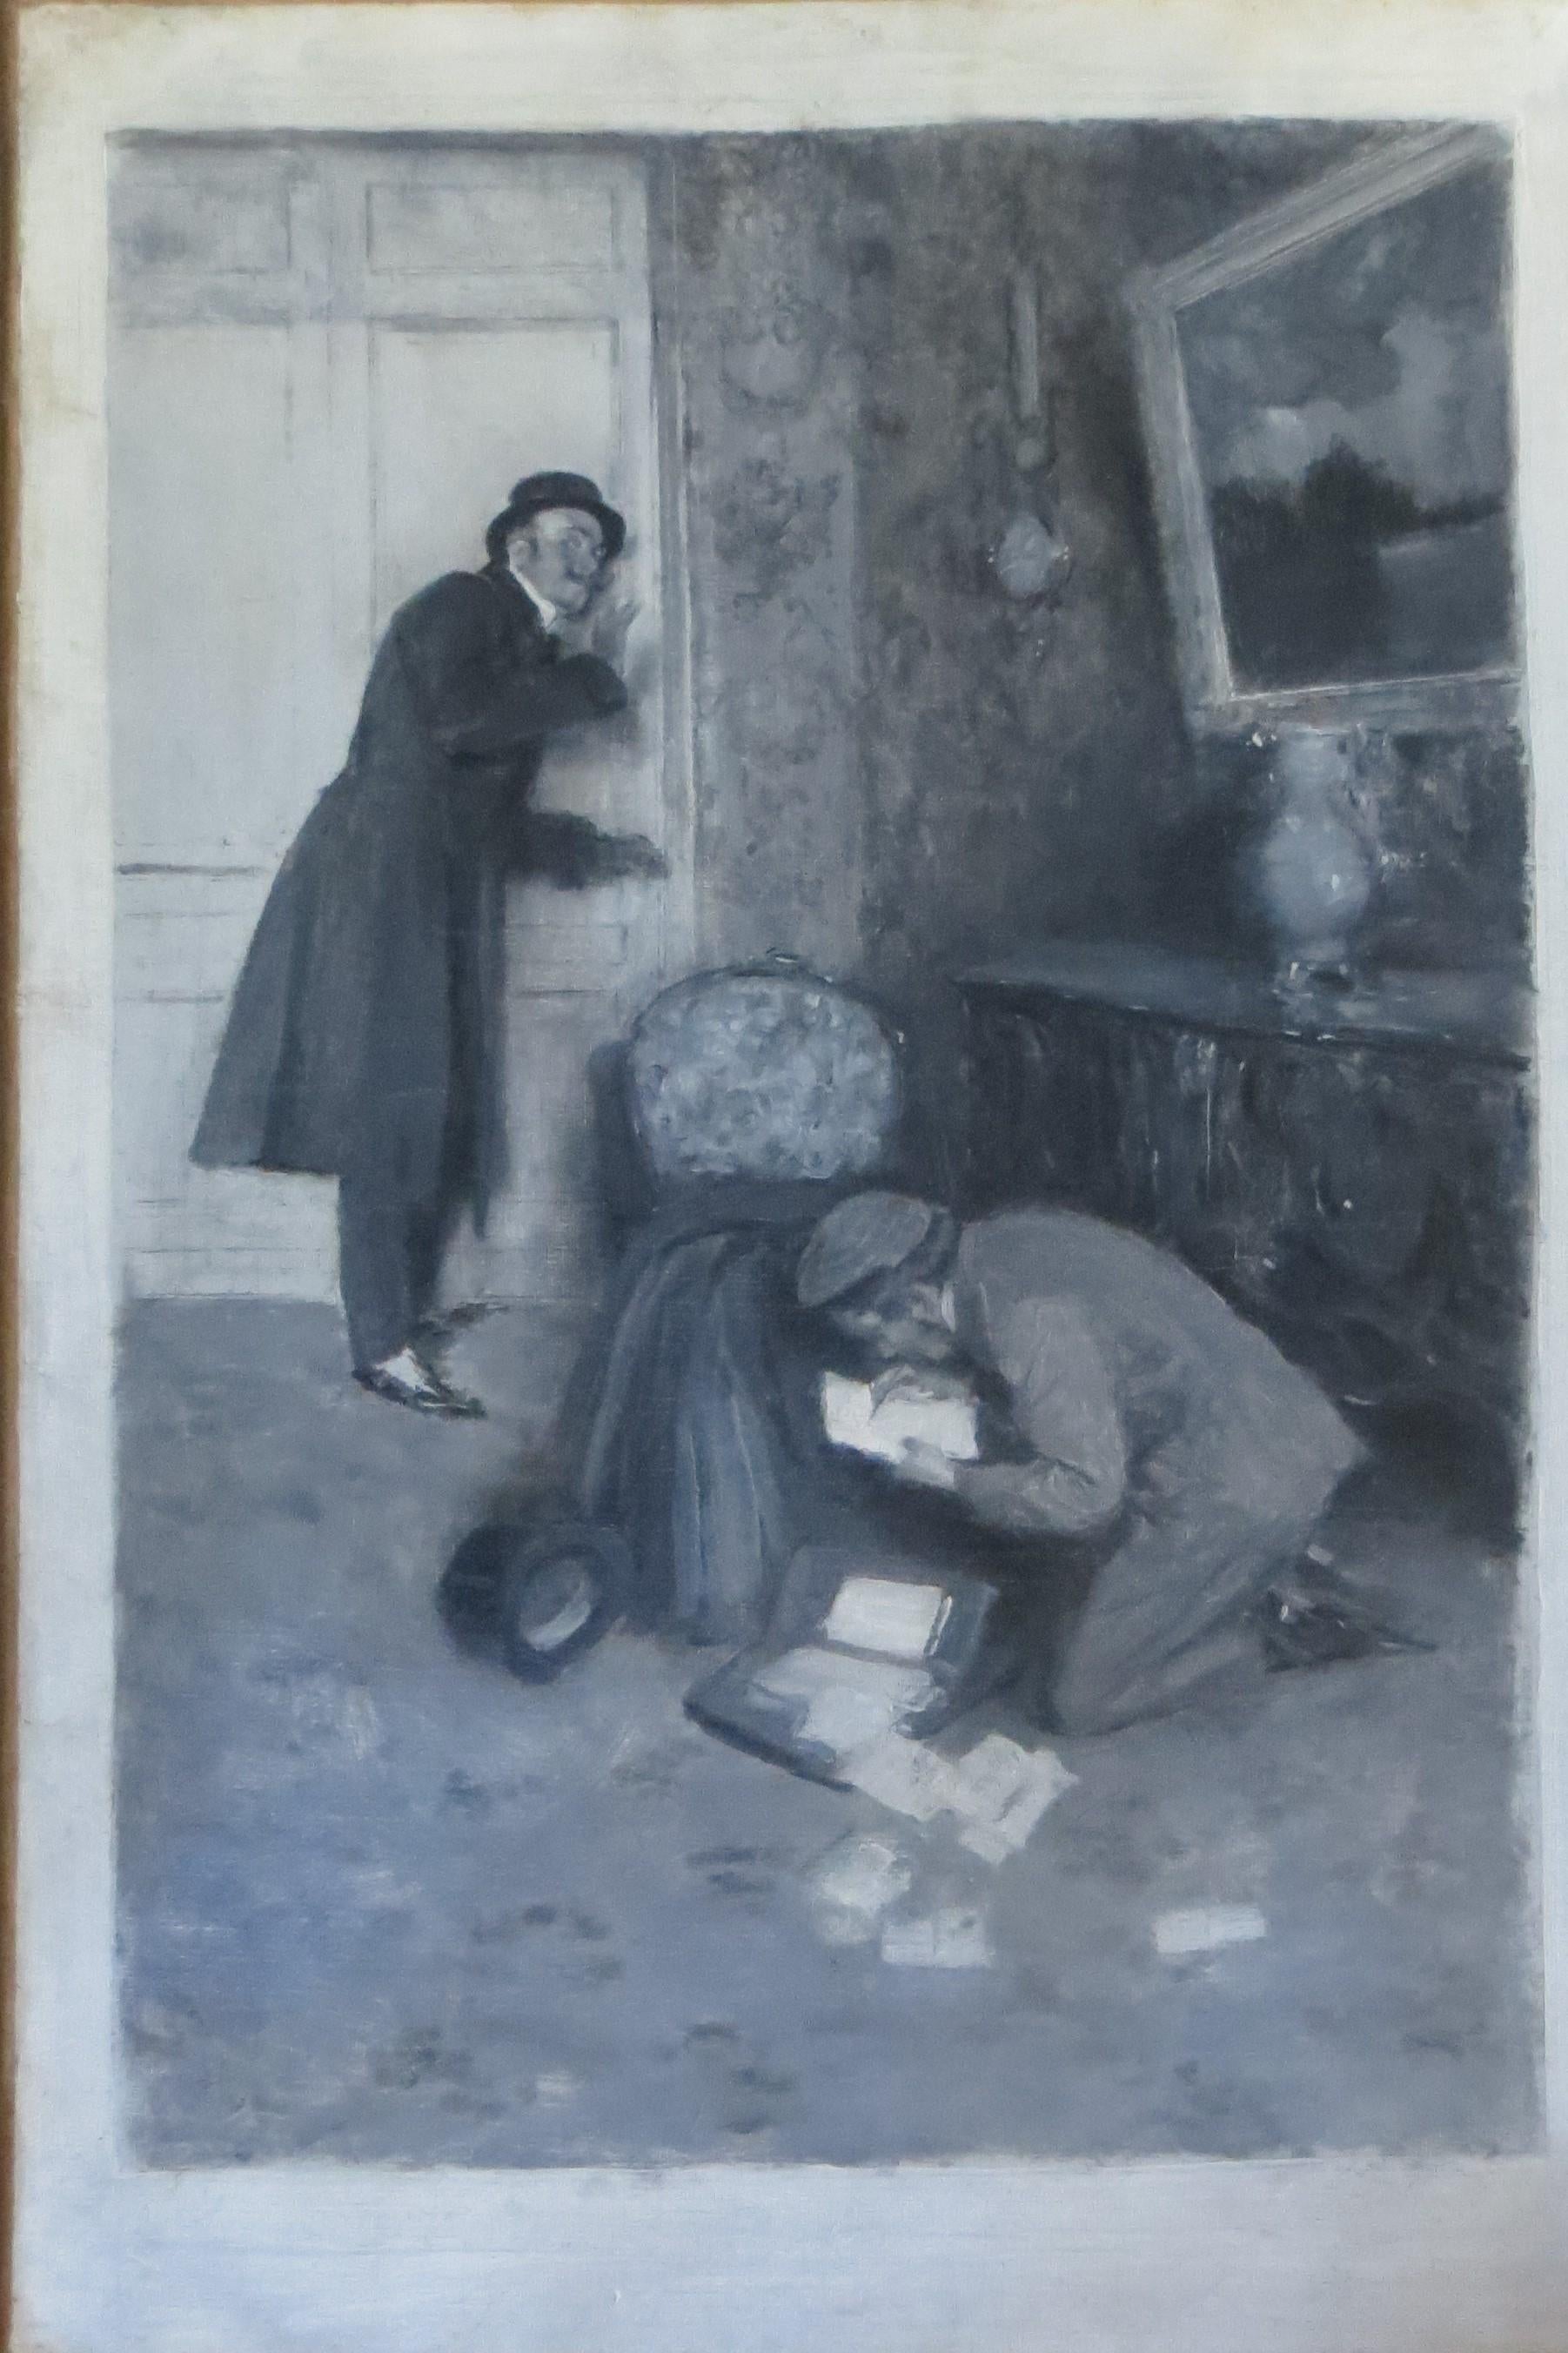 Oil on canvas probably representing a finding of adultery at the end of the 19th century. The scene is painted with many details in a camaieux of gray colors . The edges of the painting  in white to emphasize the scene as a newspaper article. We